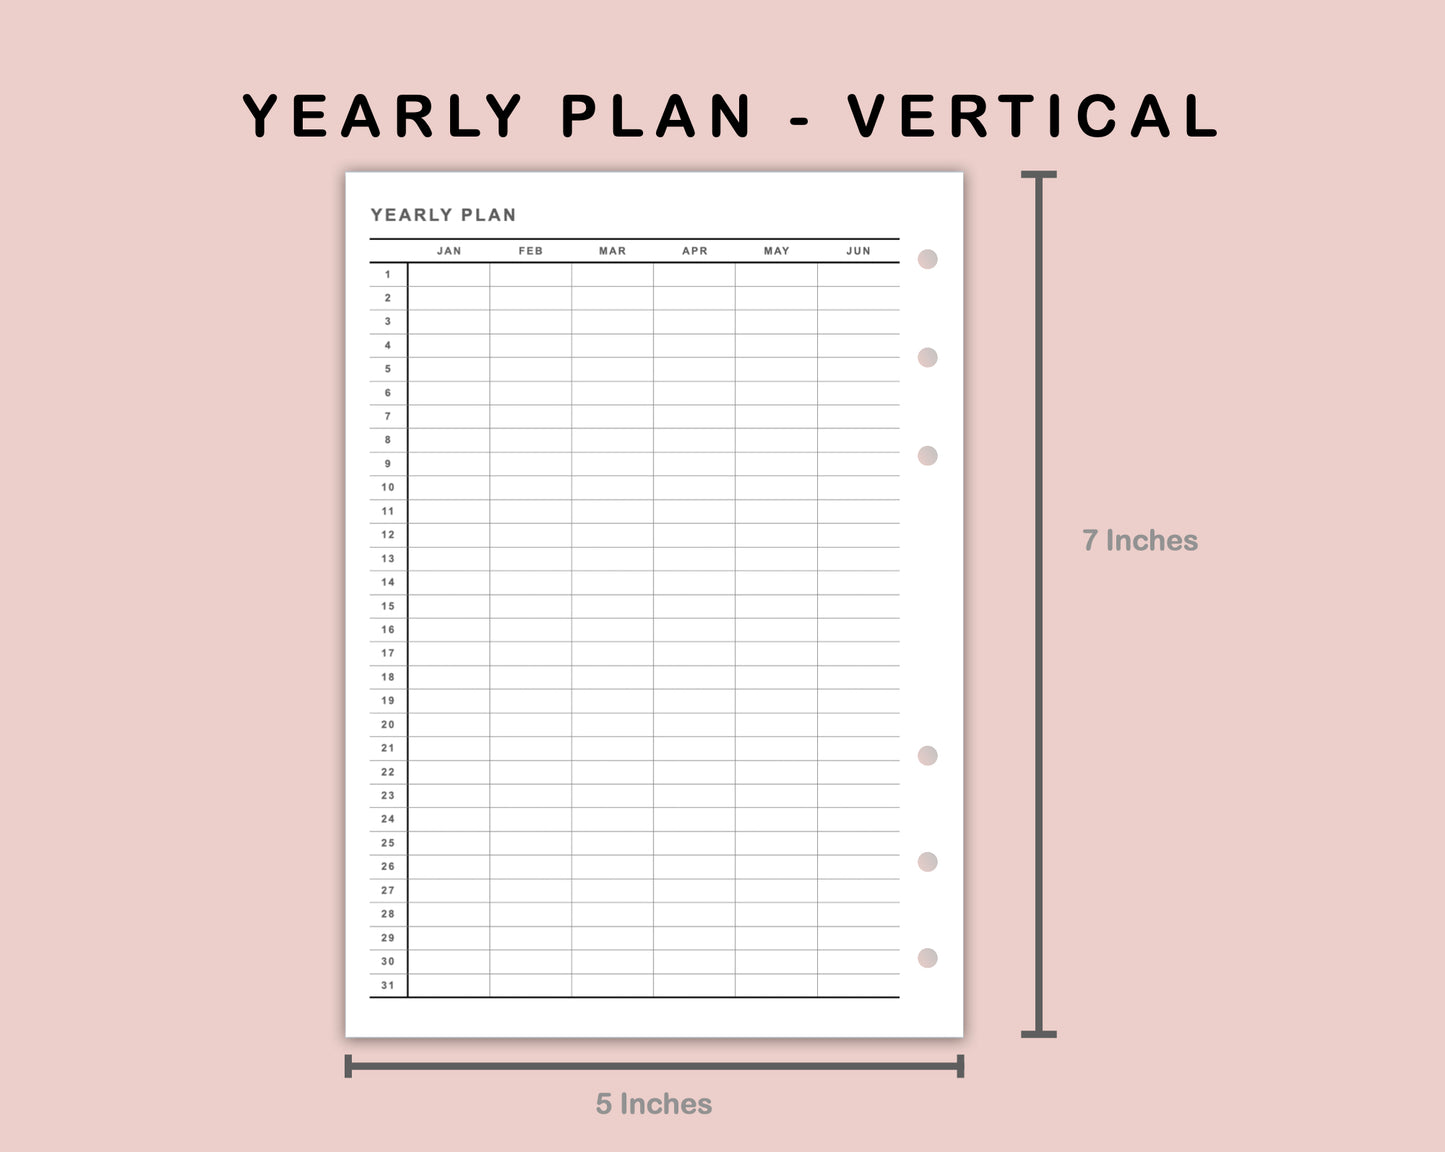 B6 Inserts - Yearly Plan - Vertical